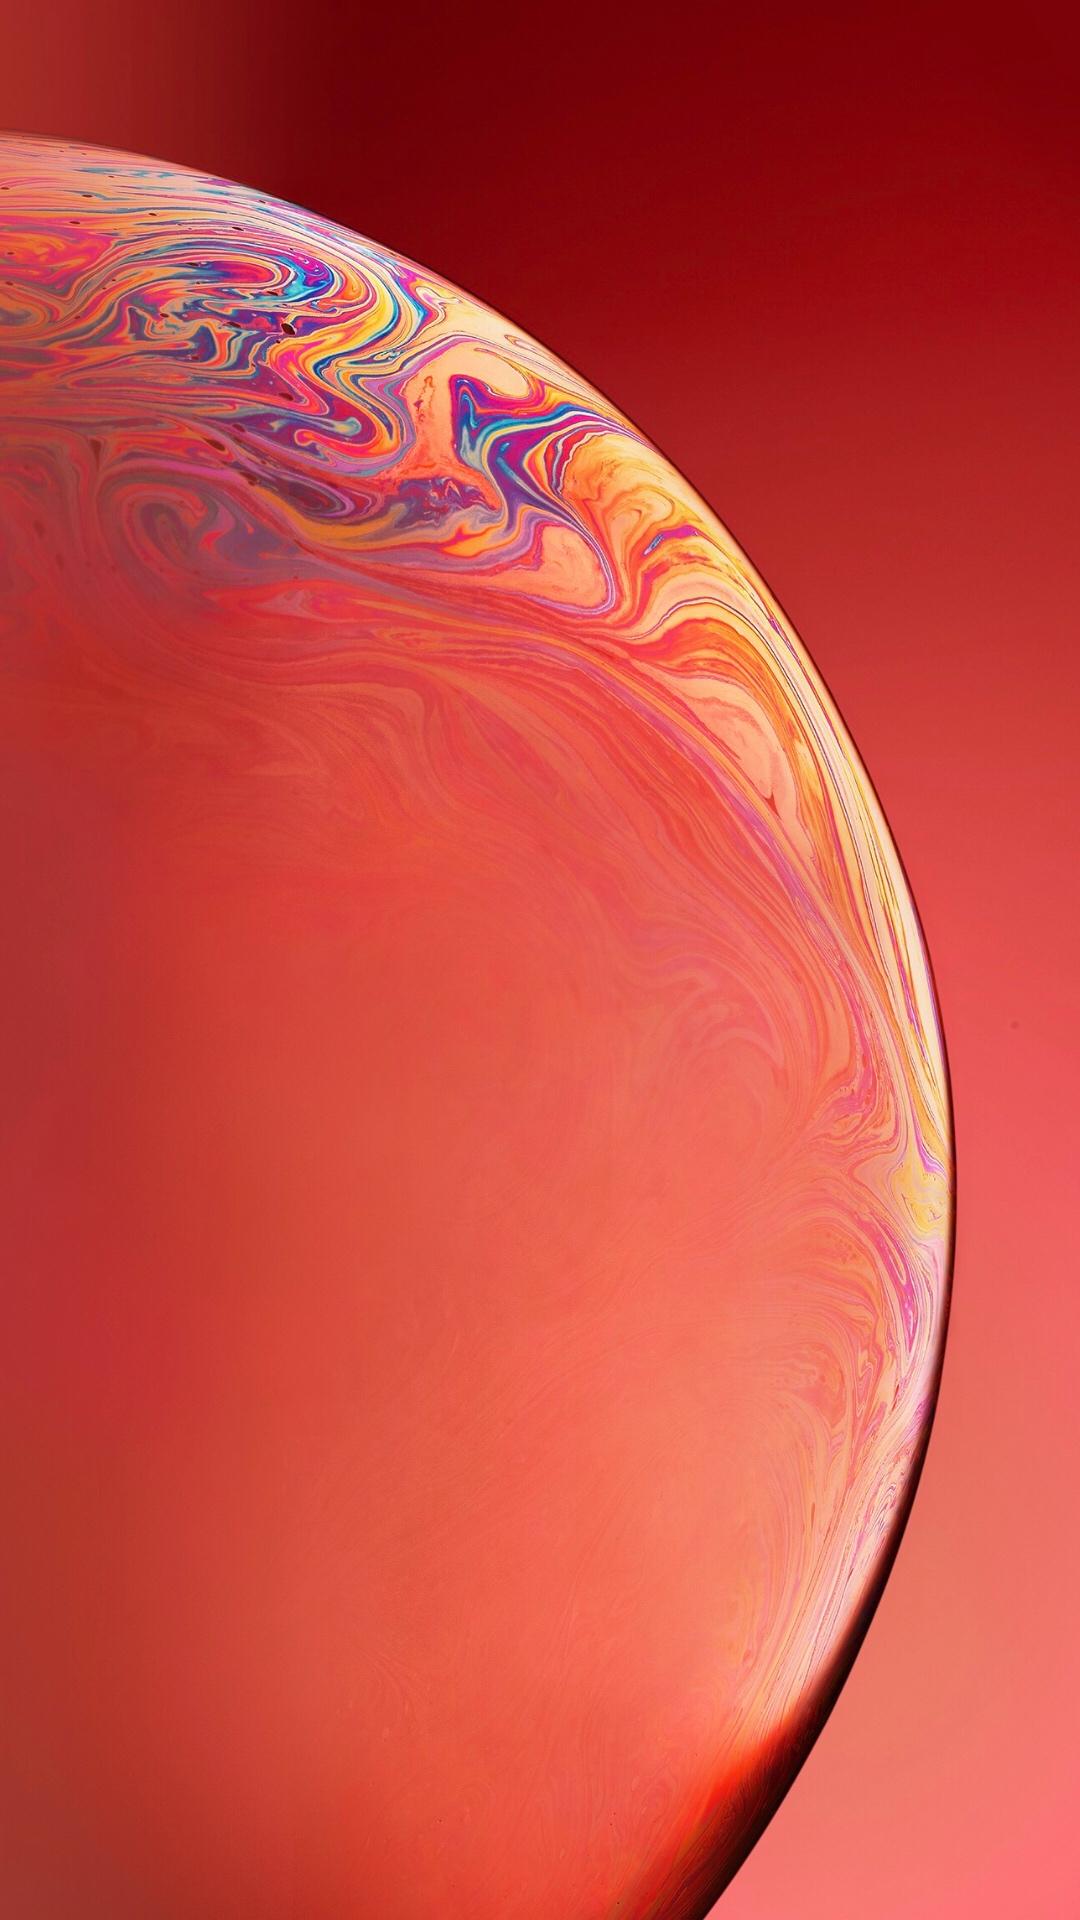 Wallpaper: iPhone Xs, iPhone Xs Max, and iPhone Xr